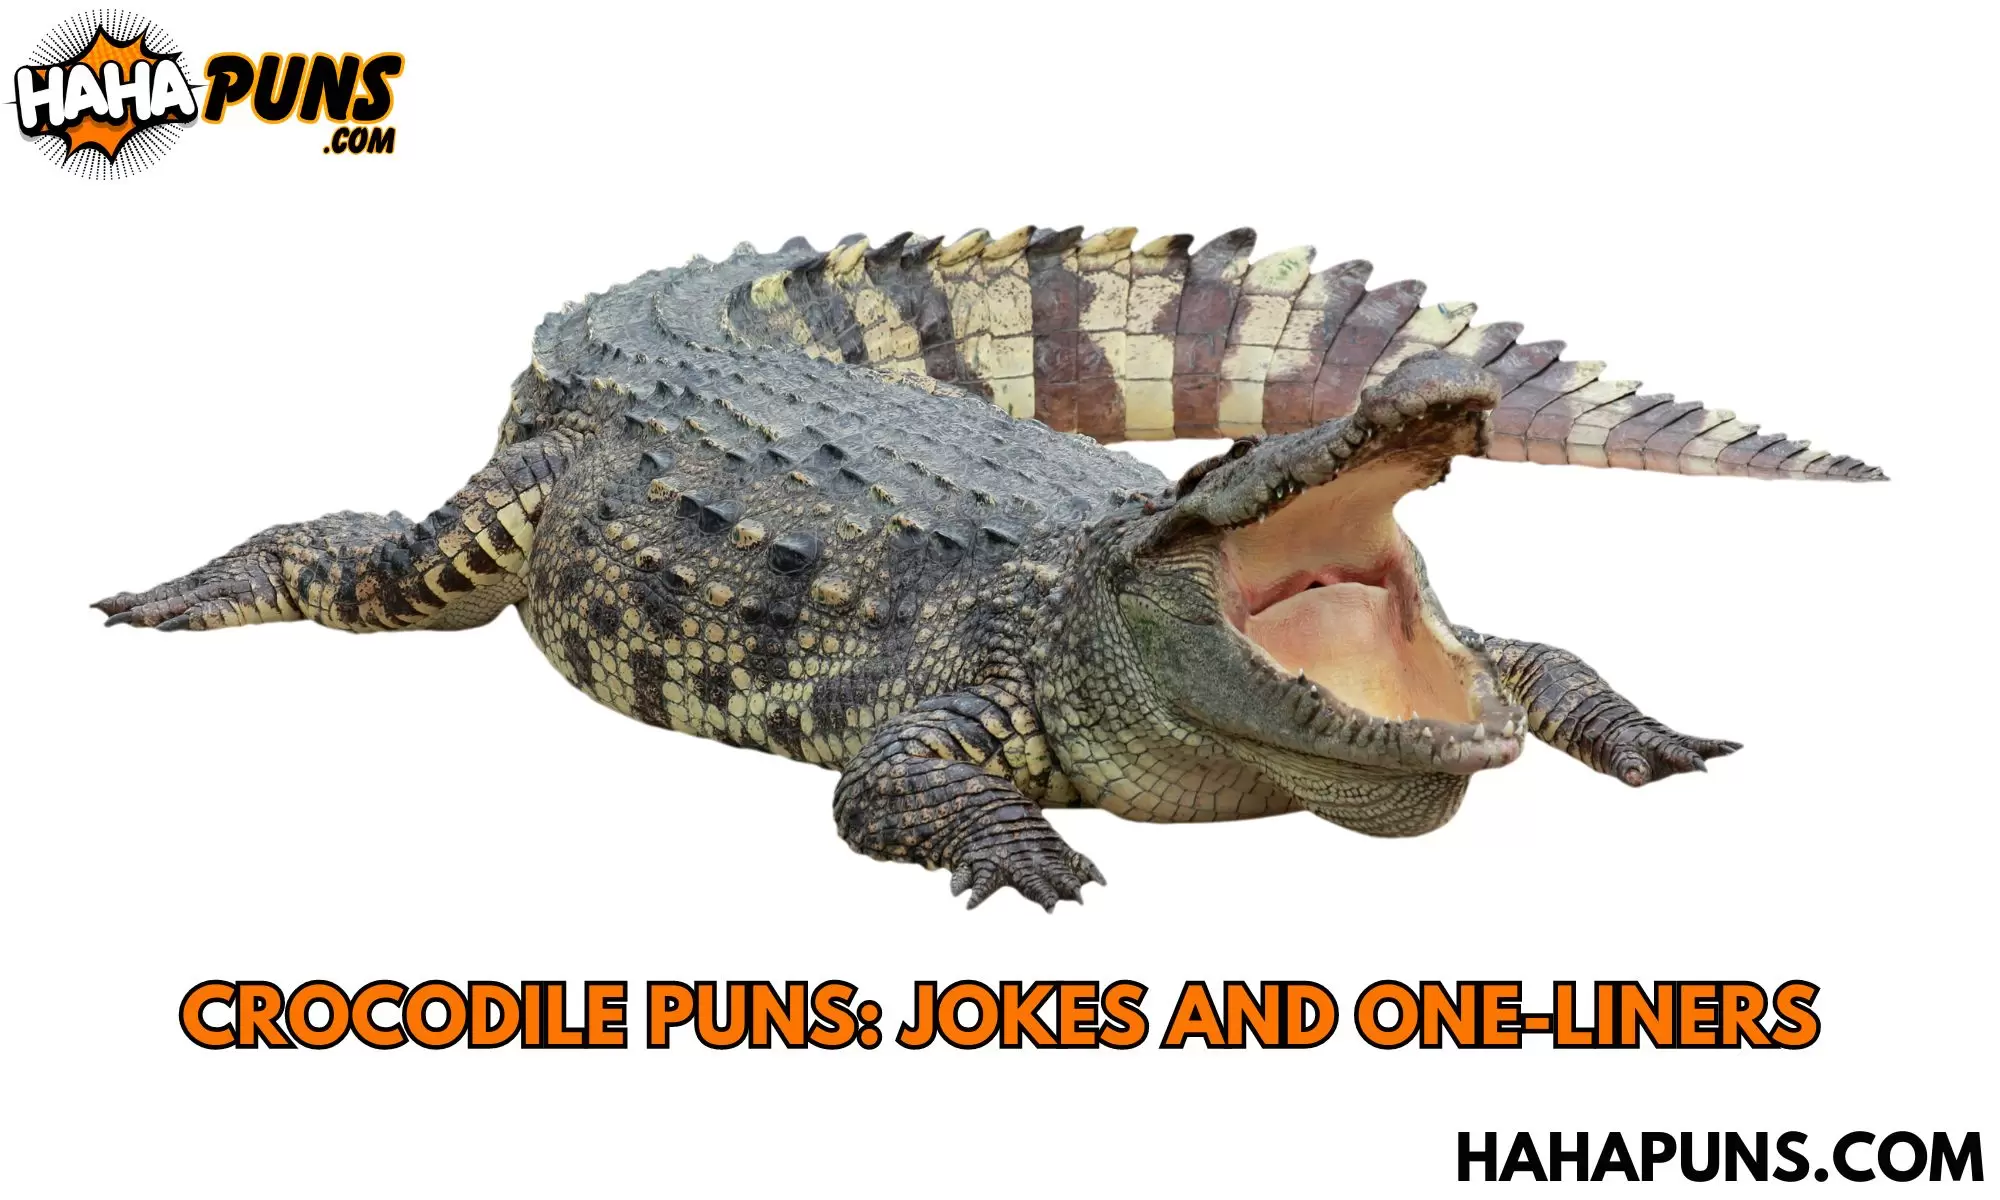 Crocodile Puns: Jokes And One-Liners